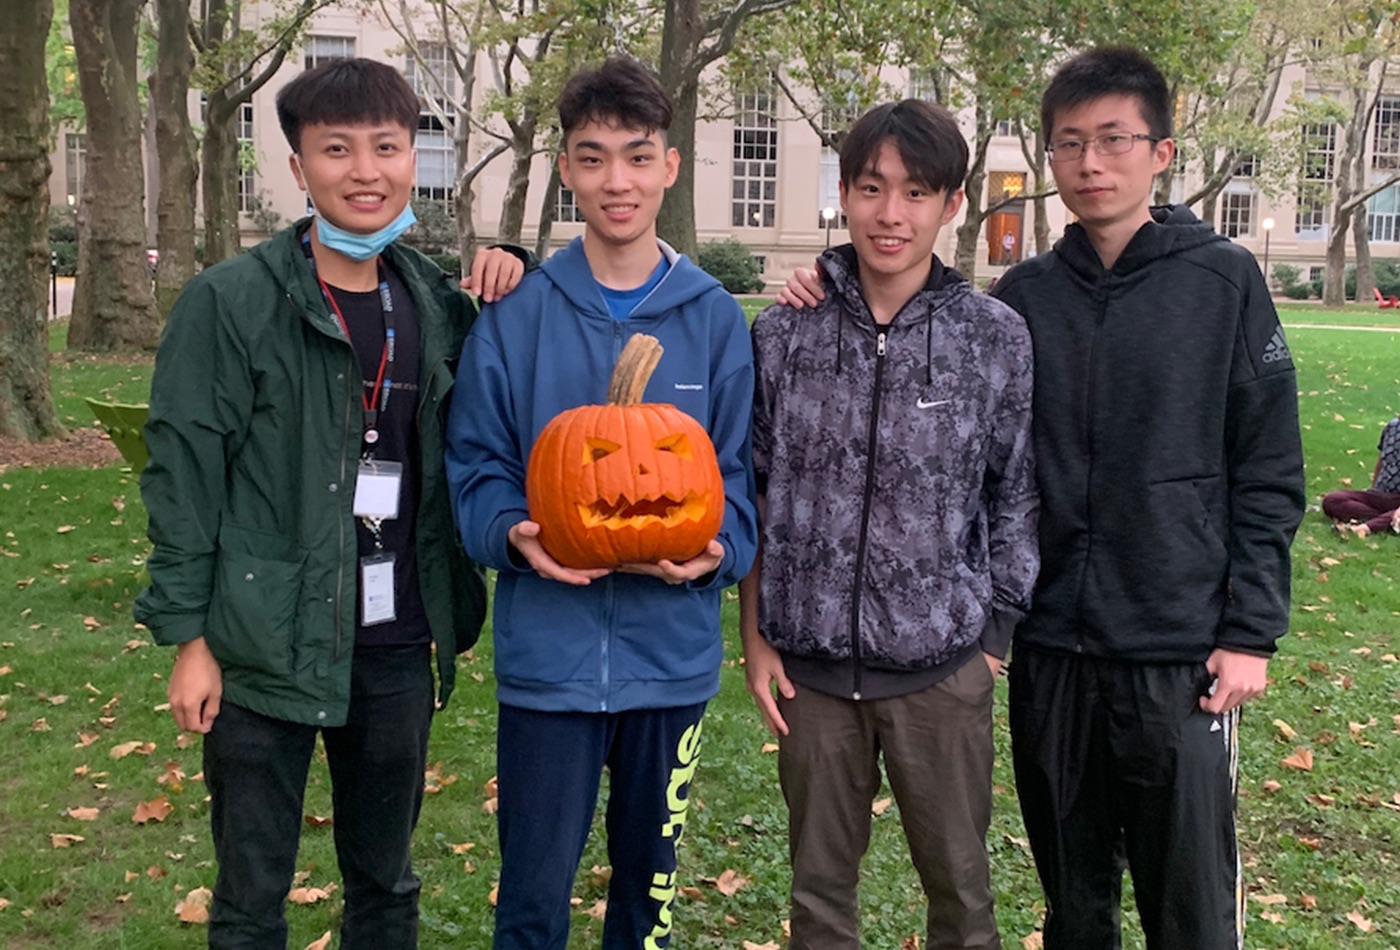 Four graduate students pose with a carved pumpkin.